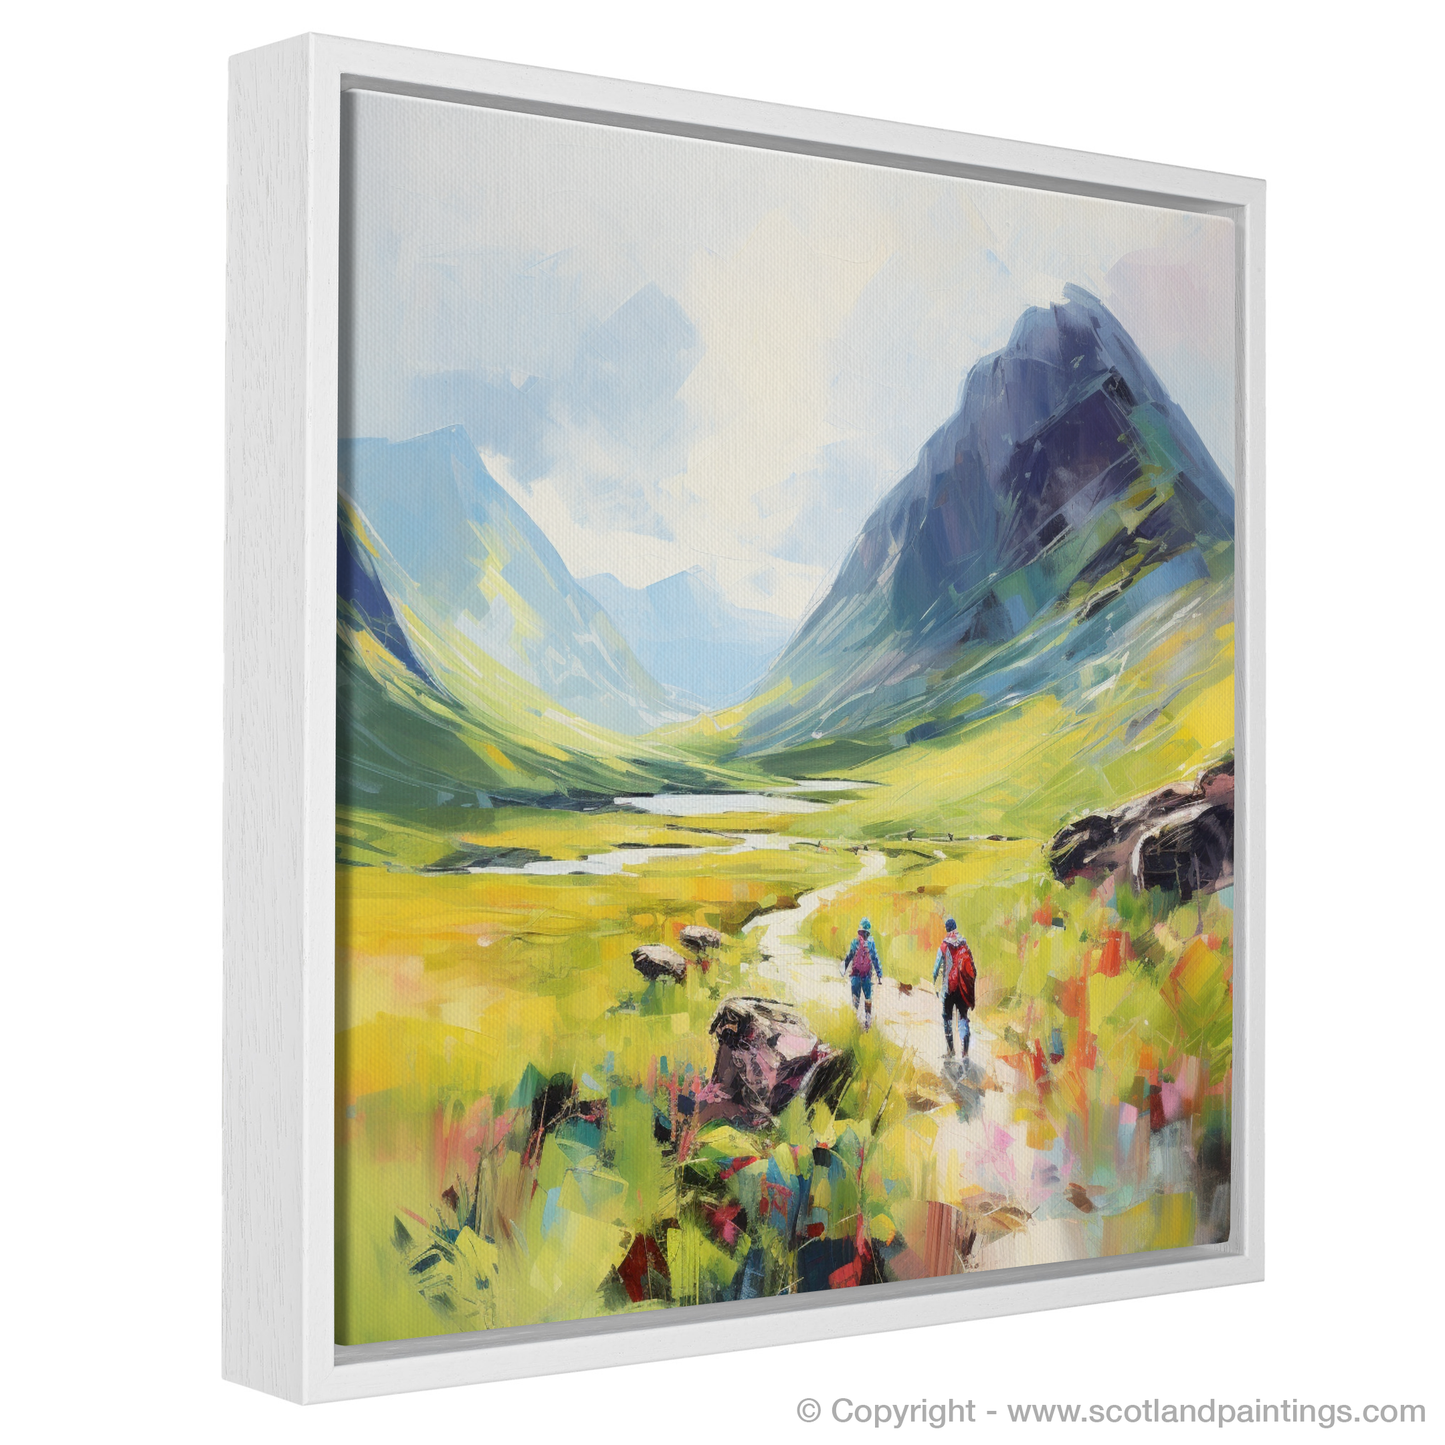 Painting and Art Print of Walkers in Glencoe during summer entitled "Summer Wanderers in Glencoe".